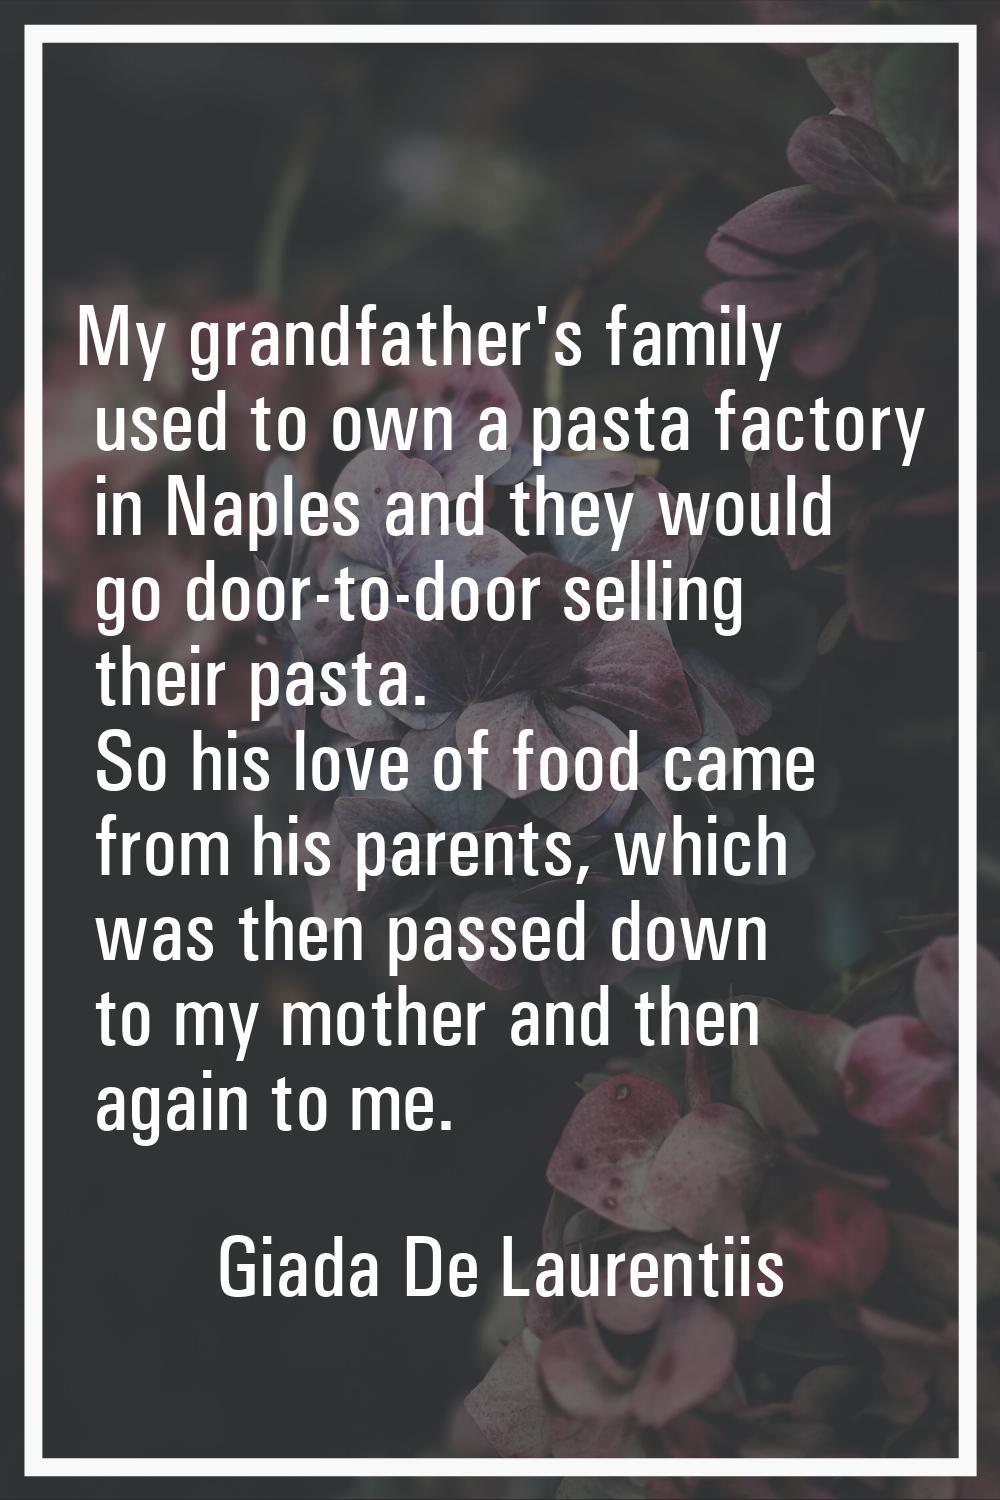 My grandfather's family used to own a pasta factory in Naples and they would go door-to-door sellin